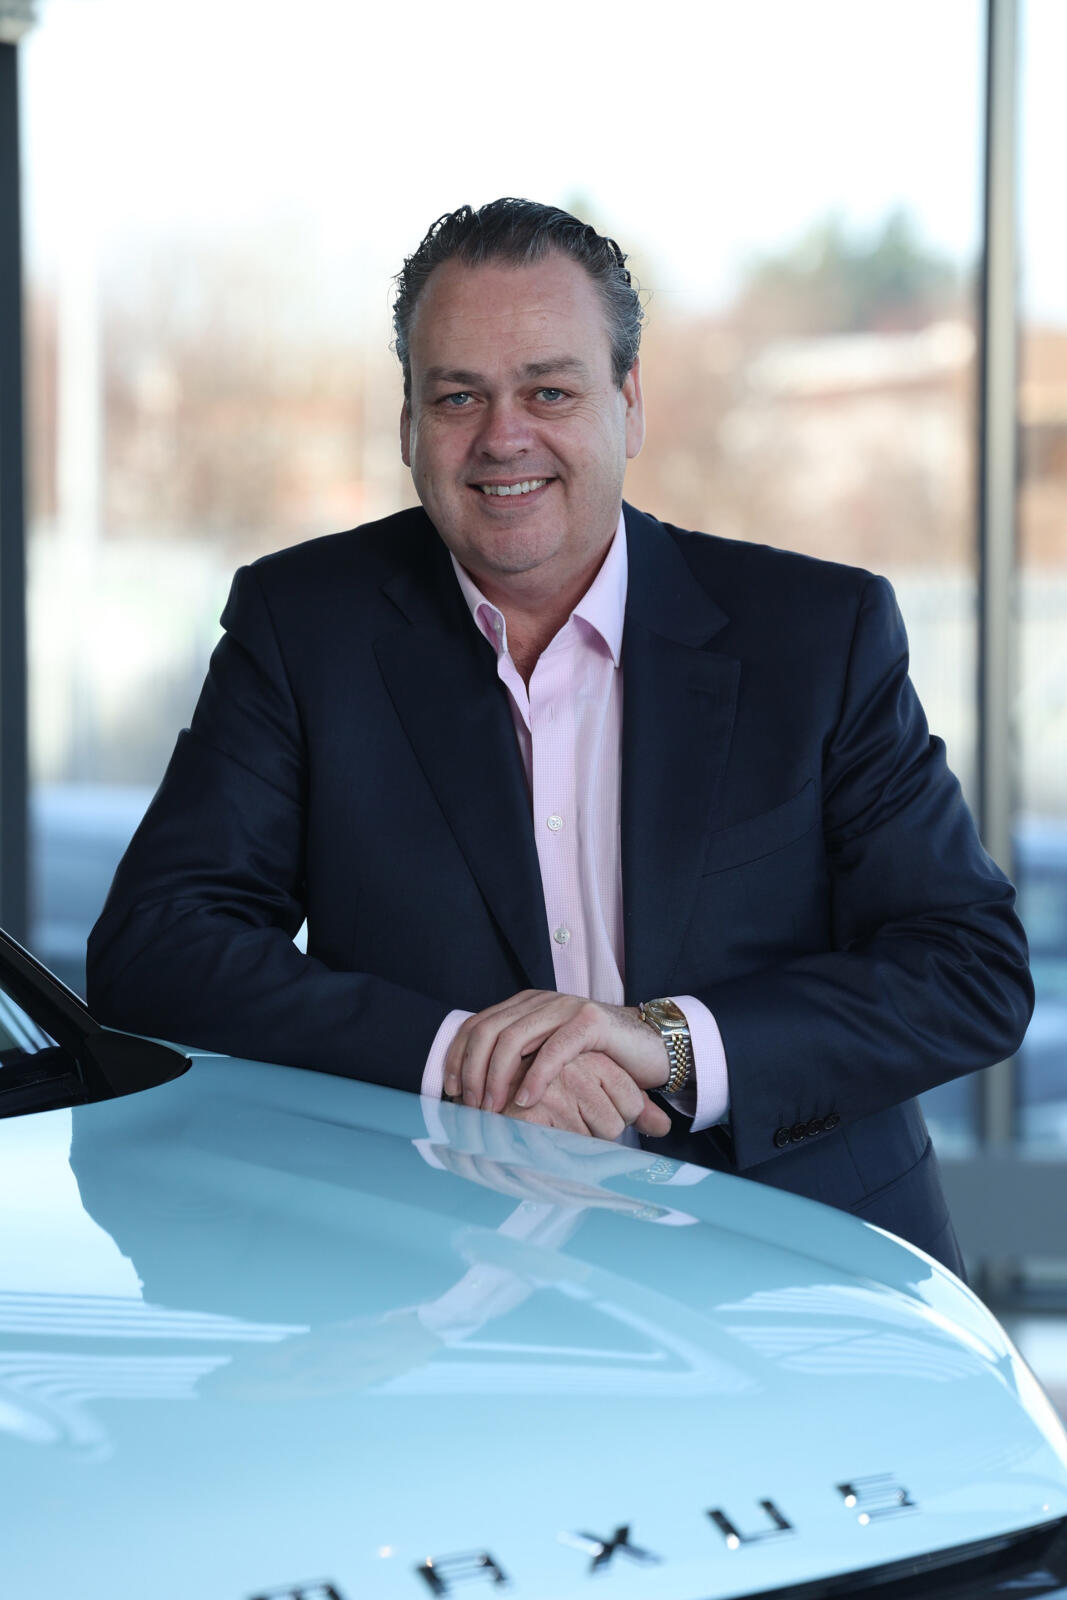 Harris Group secures number one spot for MAXUS automotive brand in Ireland